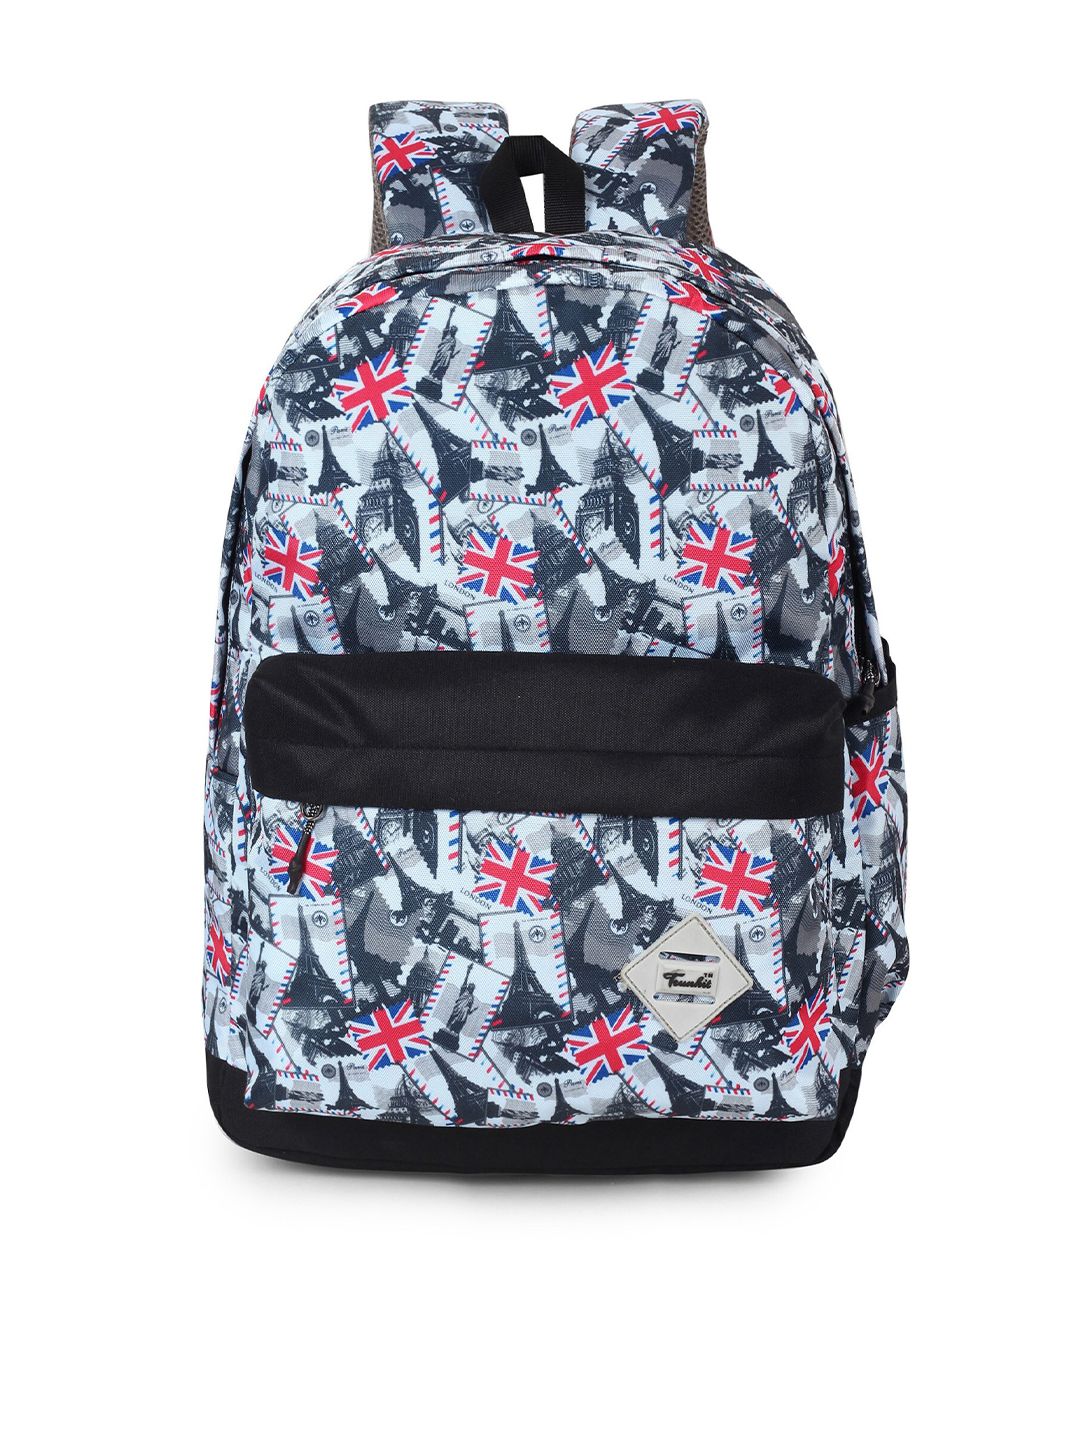 TRUNKIT Unisex Black & White Graphic Backpack Price in India